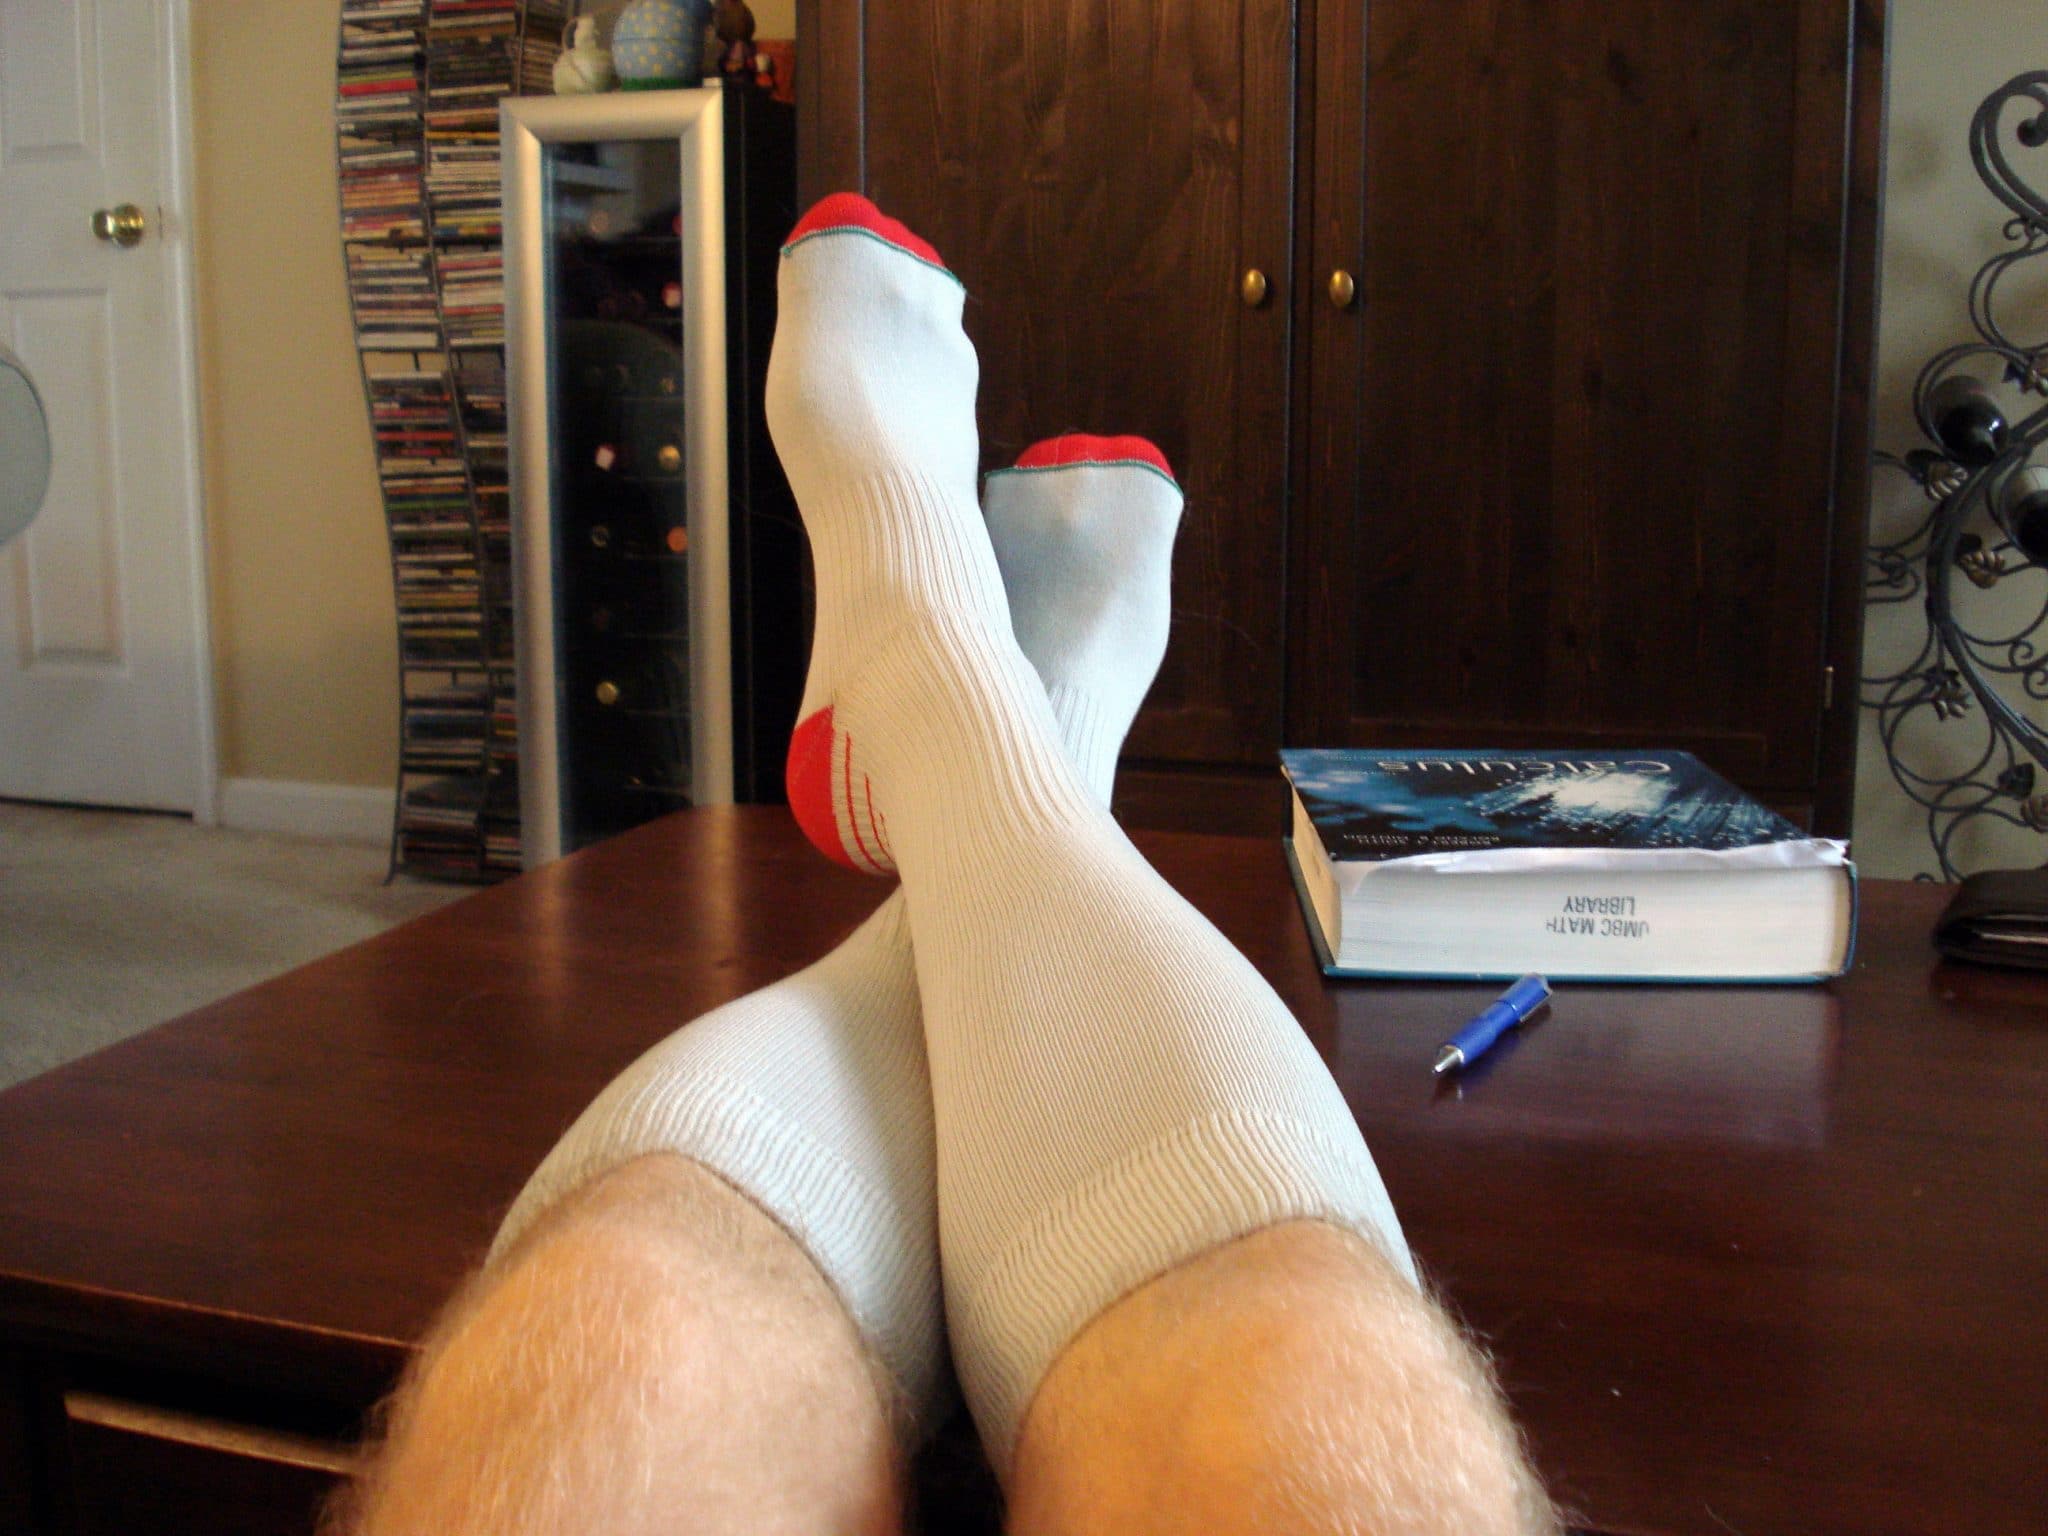 Calves wearing white compression socks propped up on table